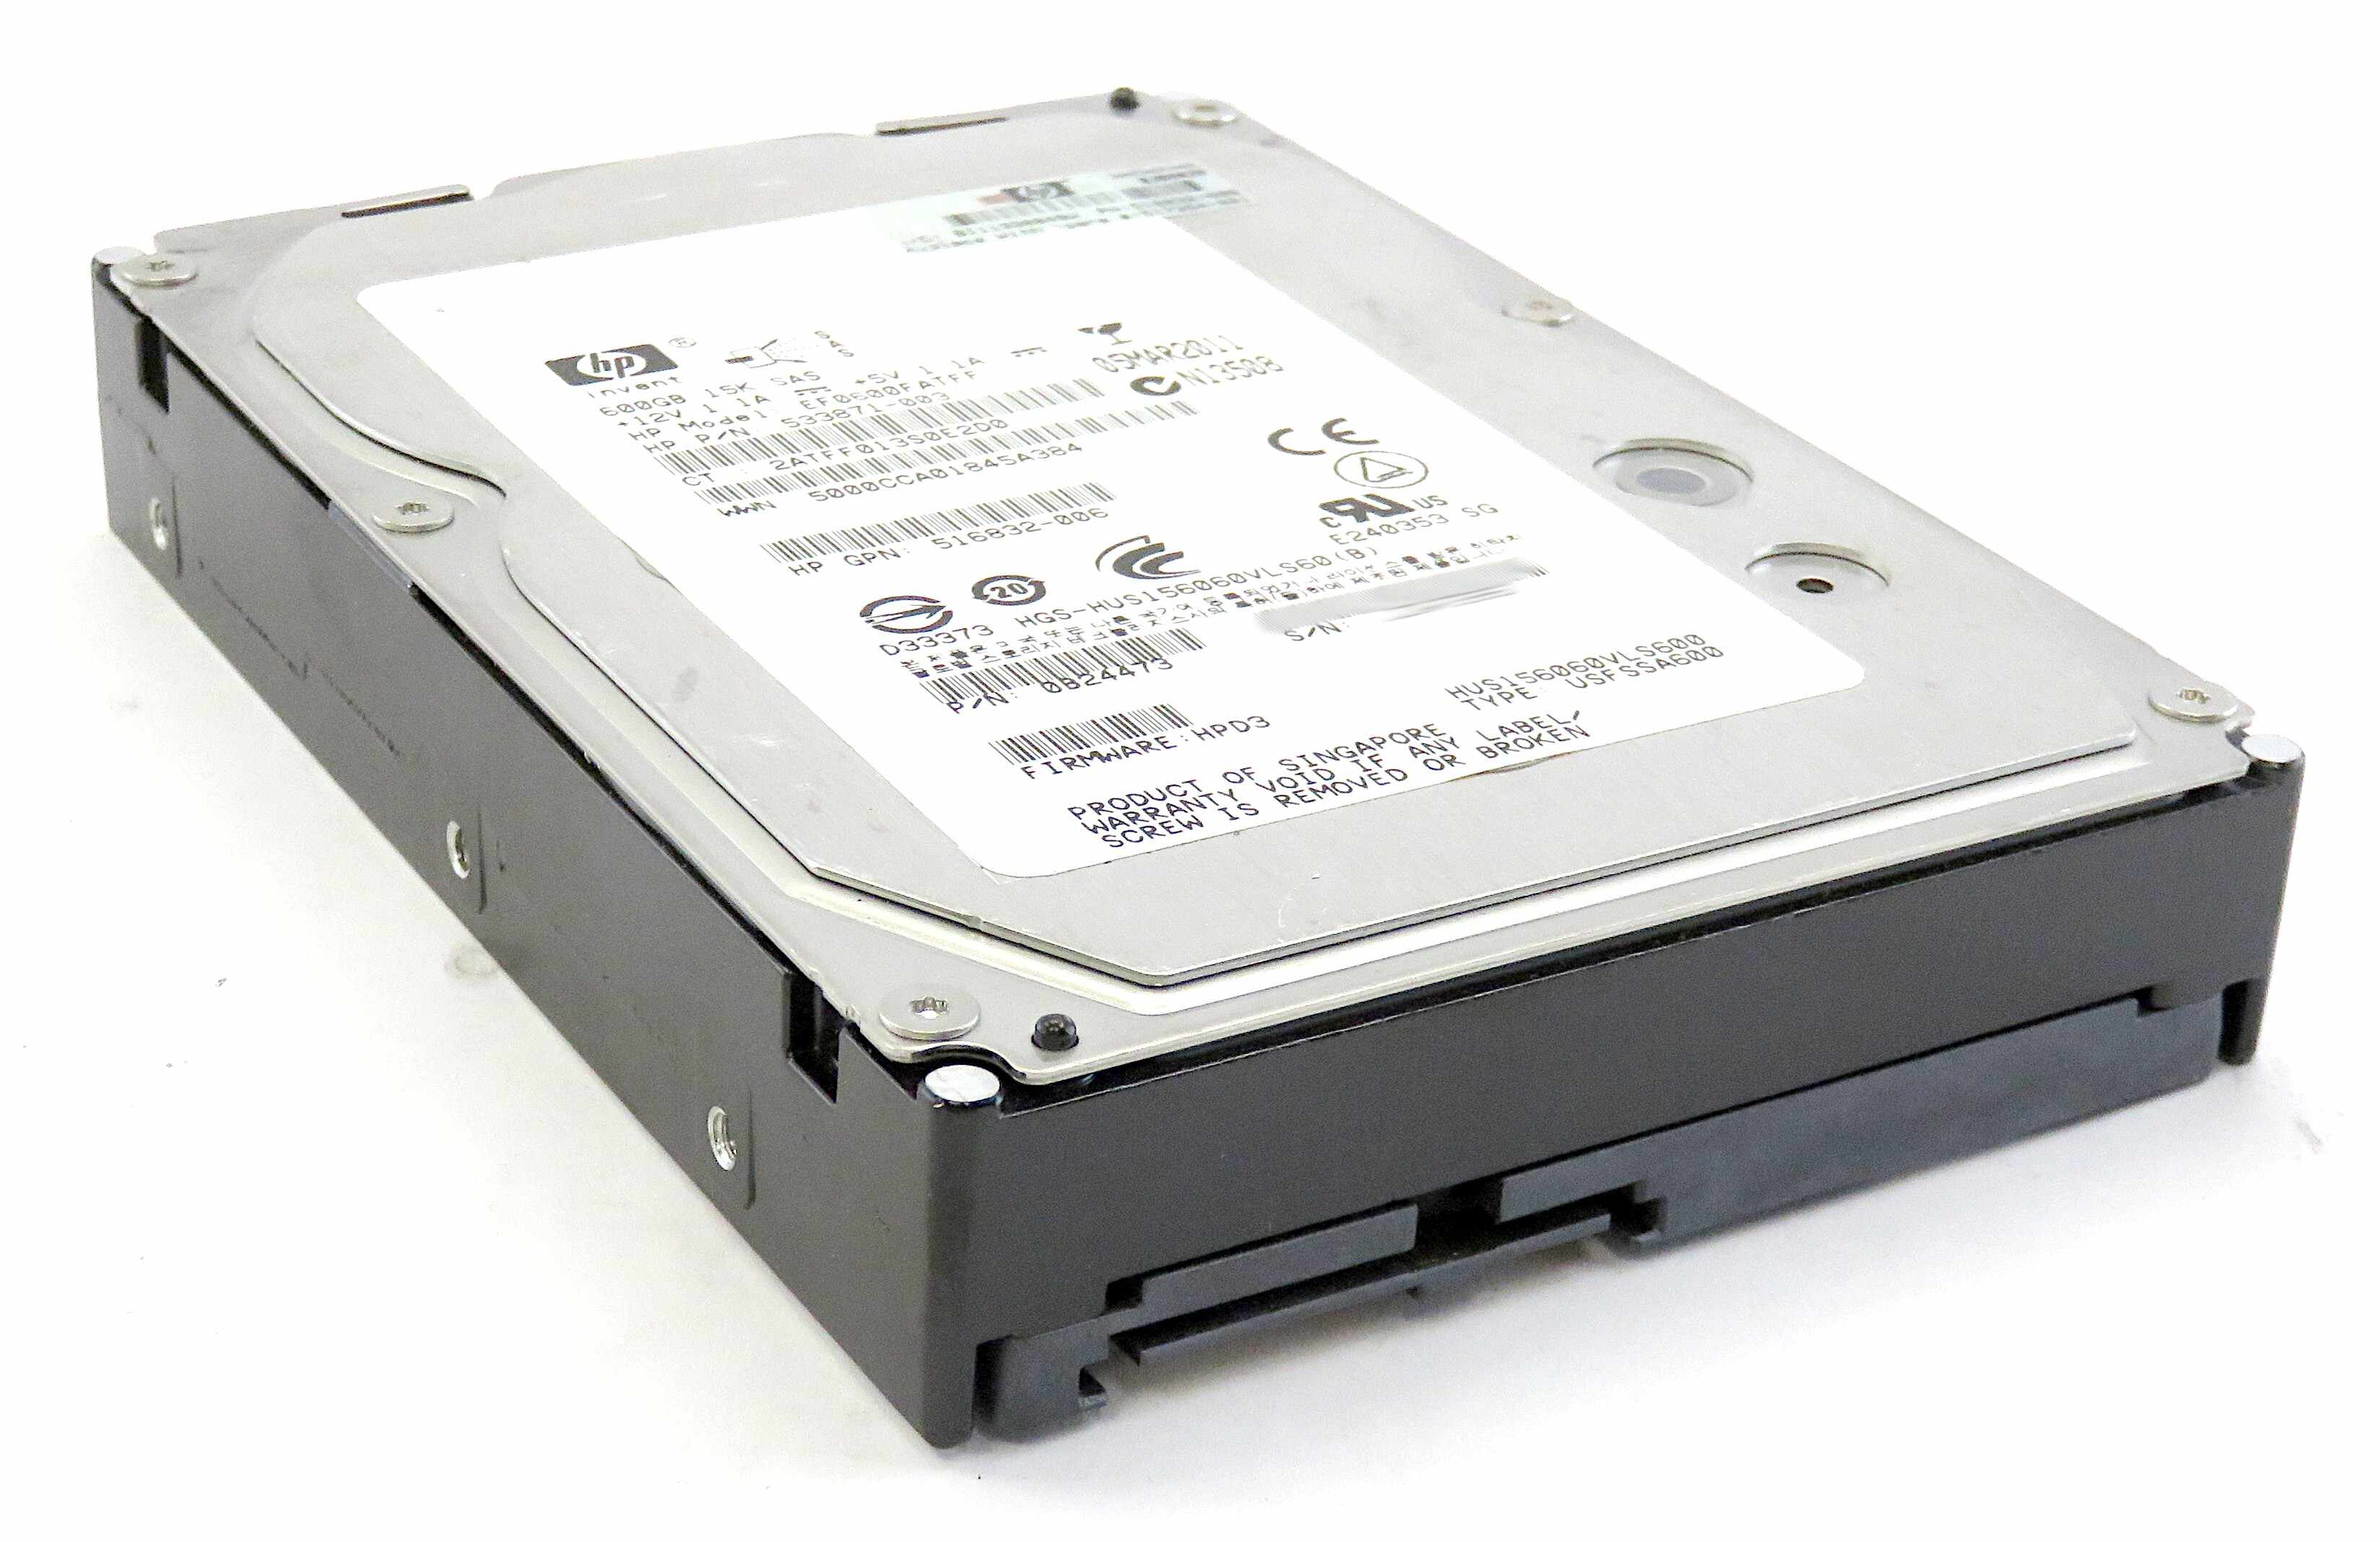 Hard Disk HPE Genuine 600GB SAS, 10K RPM, 6Gbps, 3.5 Inch, 64MB cache